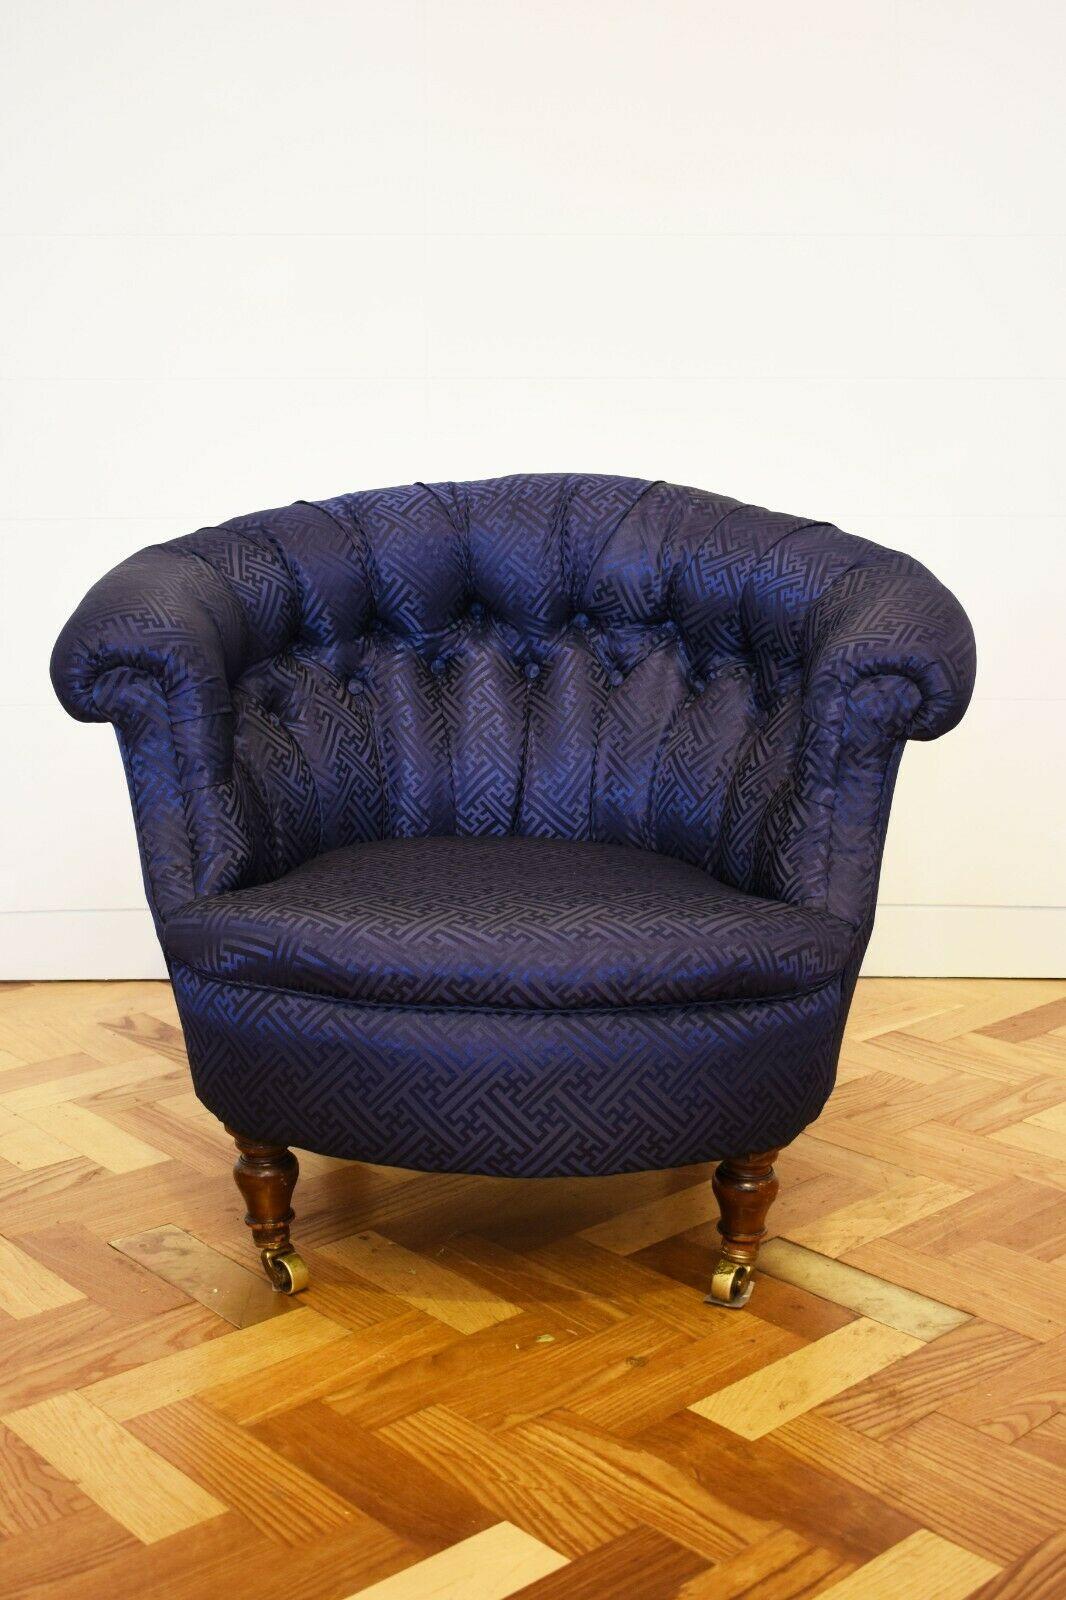 Victorian Button Back Tub chair with Mahogony Legs, Upholstered in Navy Silk

Set upon mahogony legs with brass castors, this classic Victorian tub chair design has been reimagined through its newly upholstered geometric fabric. 

This chair